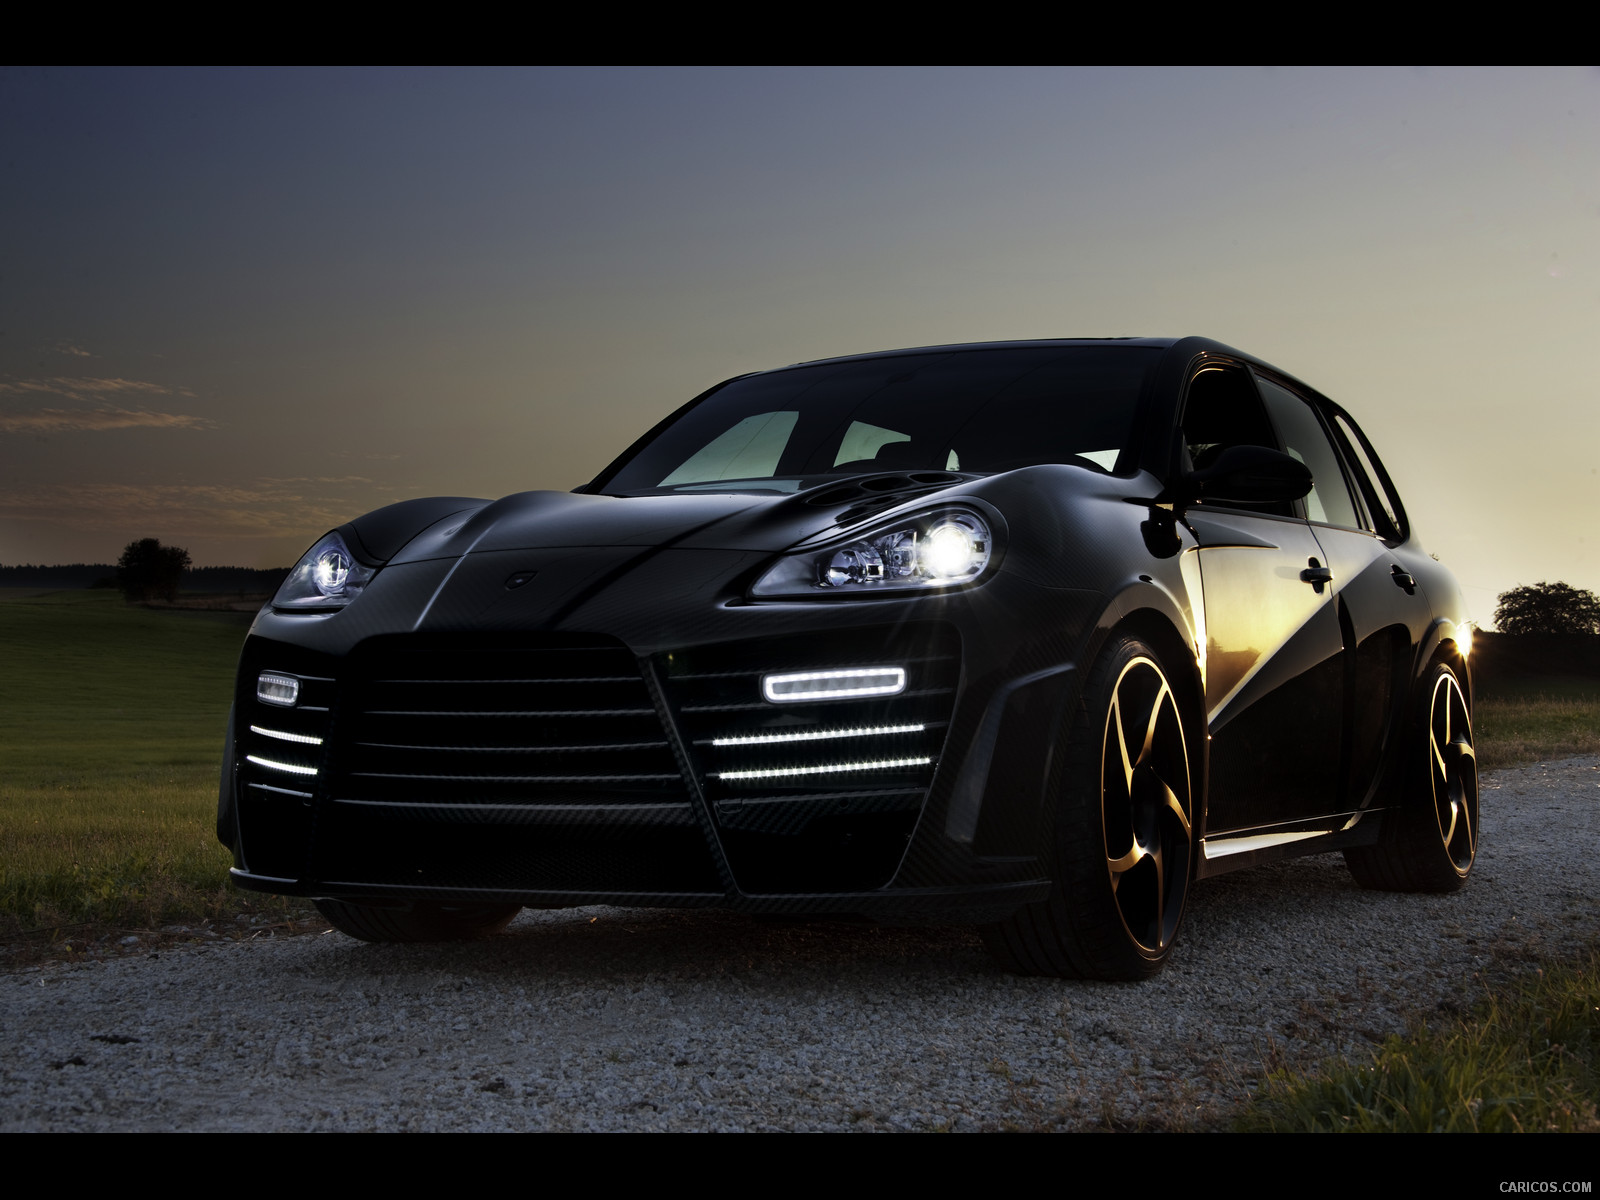 2009 Mansory Chopster based on Porsche Cayenne Turbo S  - Front, #2 of 38